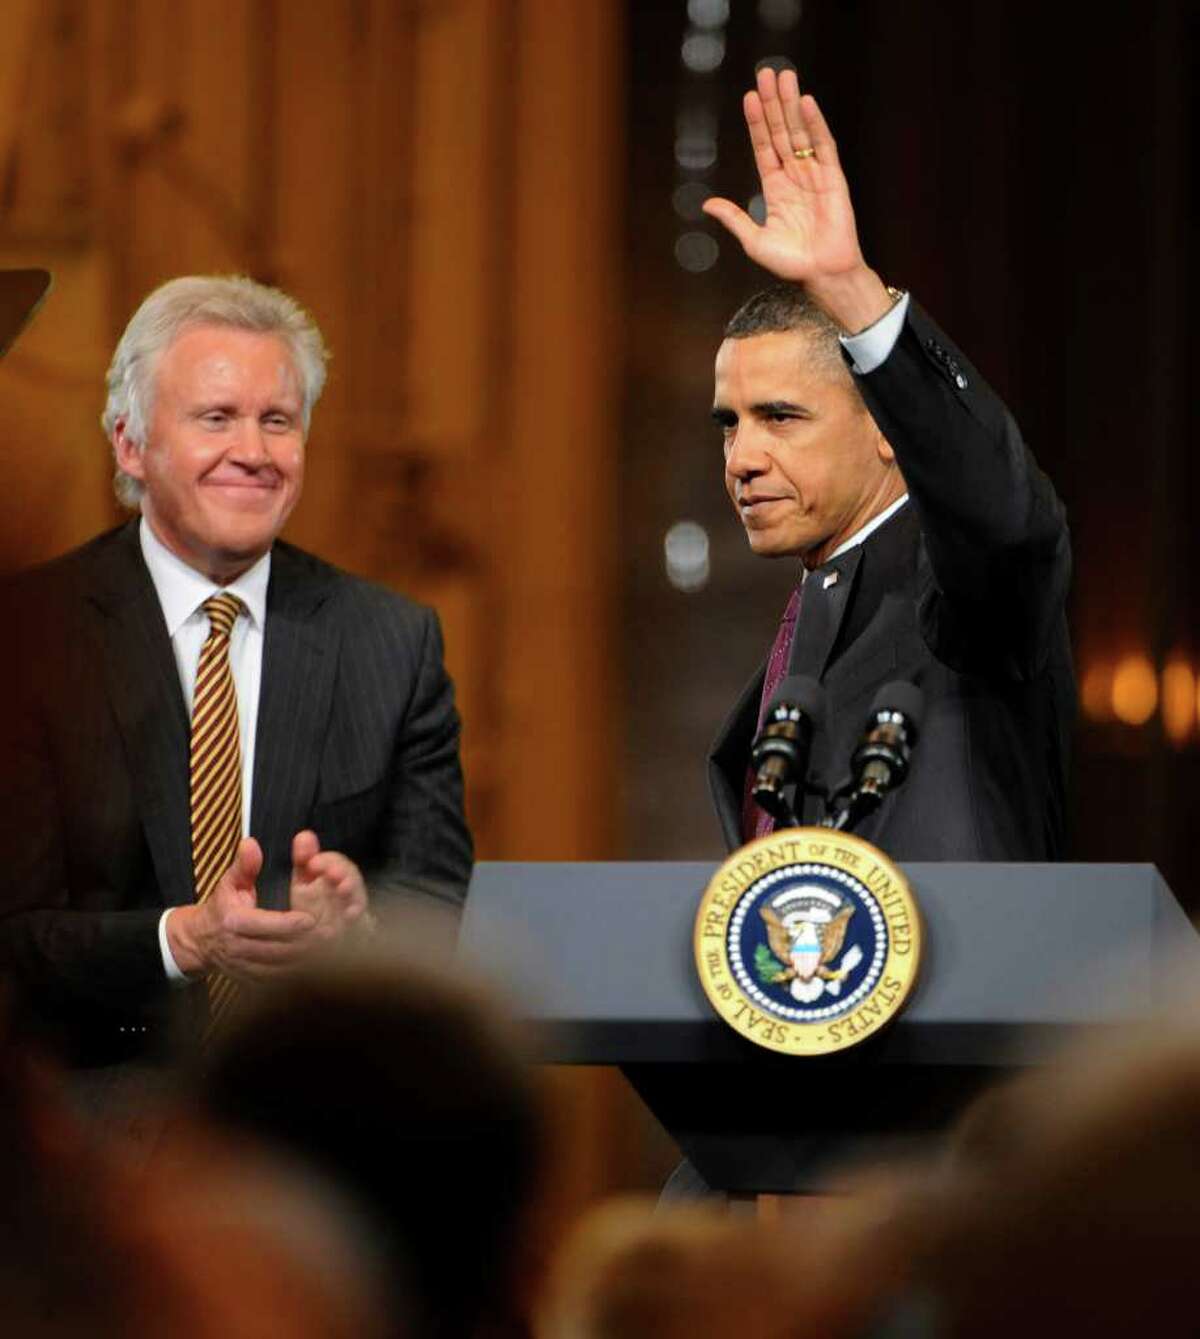 President Barack Obama waves to the gathering of workers and dignitaries as GE CEO Jeffrey Immelt looks on at the GE plant in Schenectady January 21, 2011. (Skip Dickstein / Times Union)